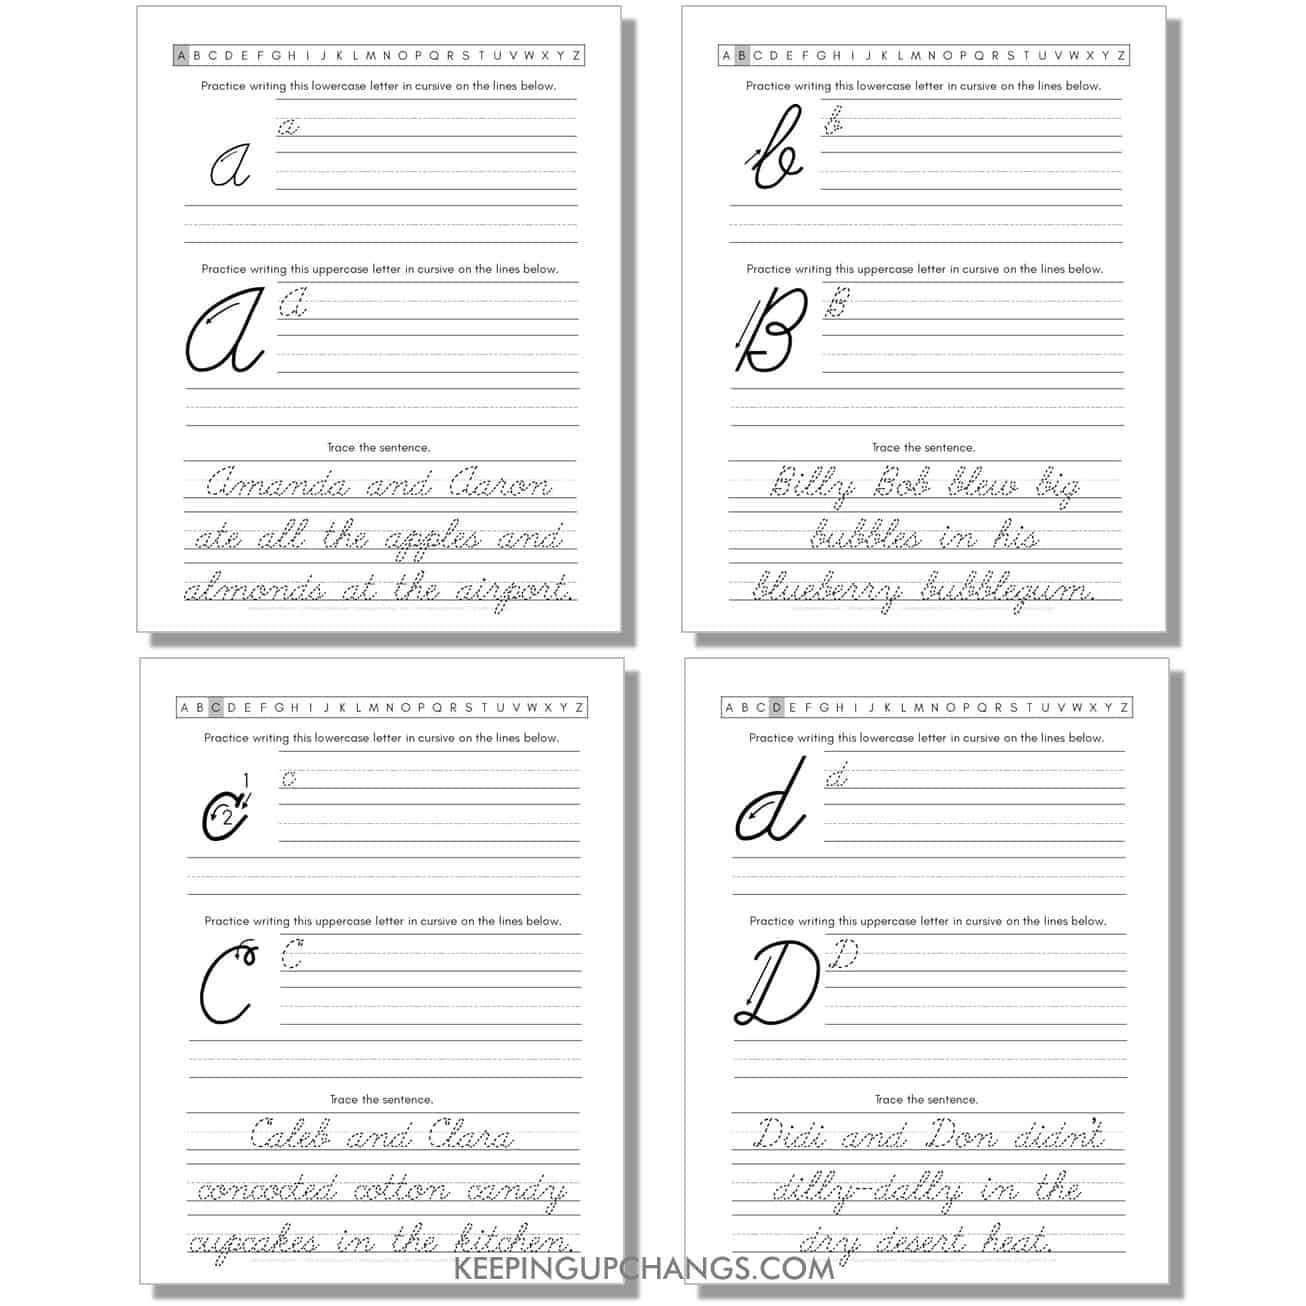 cursive worksheet with uppercase, lowercase letters and sentences for a, b, c, d.